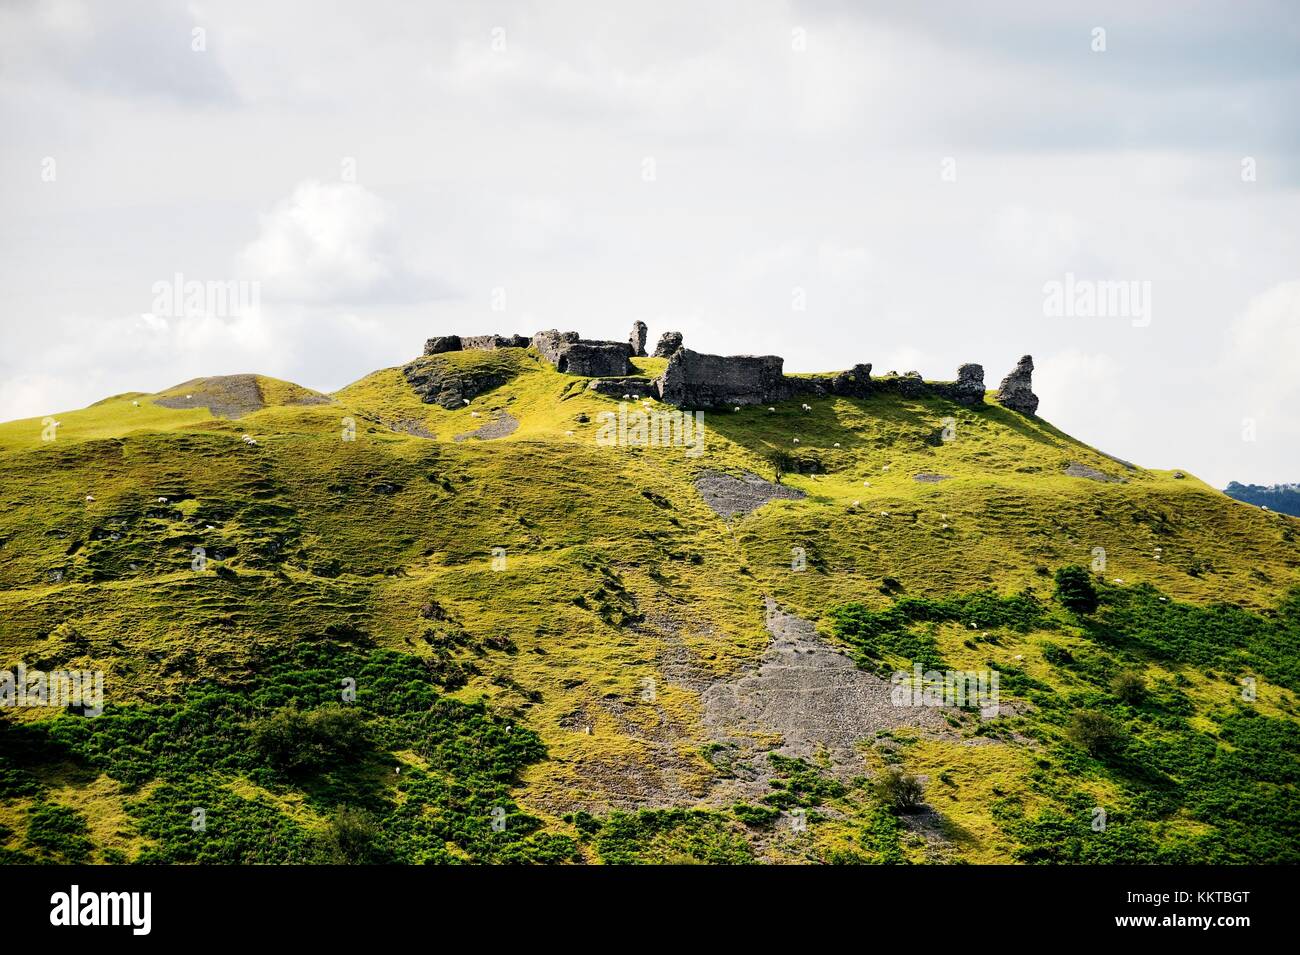 Castell Dinas Bran, Llangollen, Denbighshire, Wales. On an Iron Age site, the stone castle dates from 13 C Stock Photo